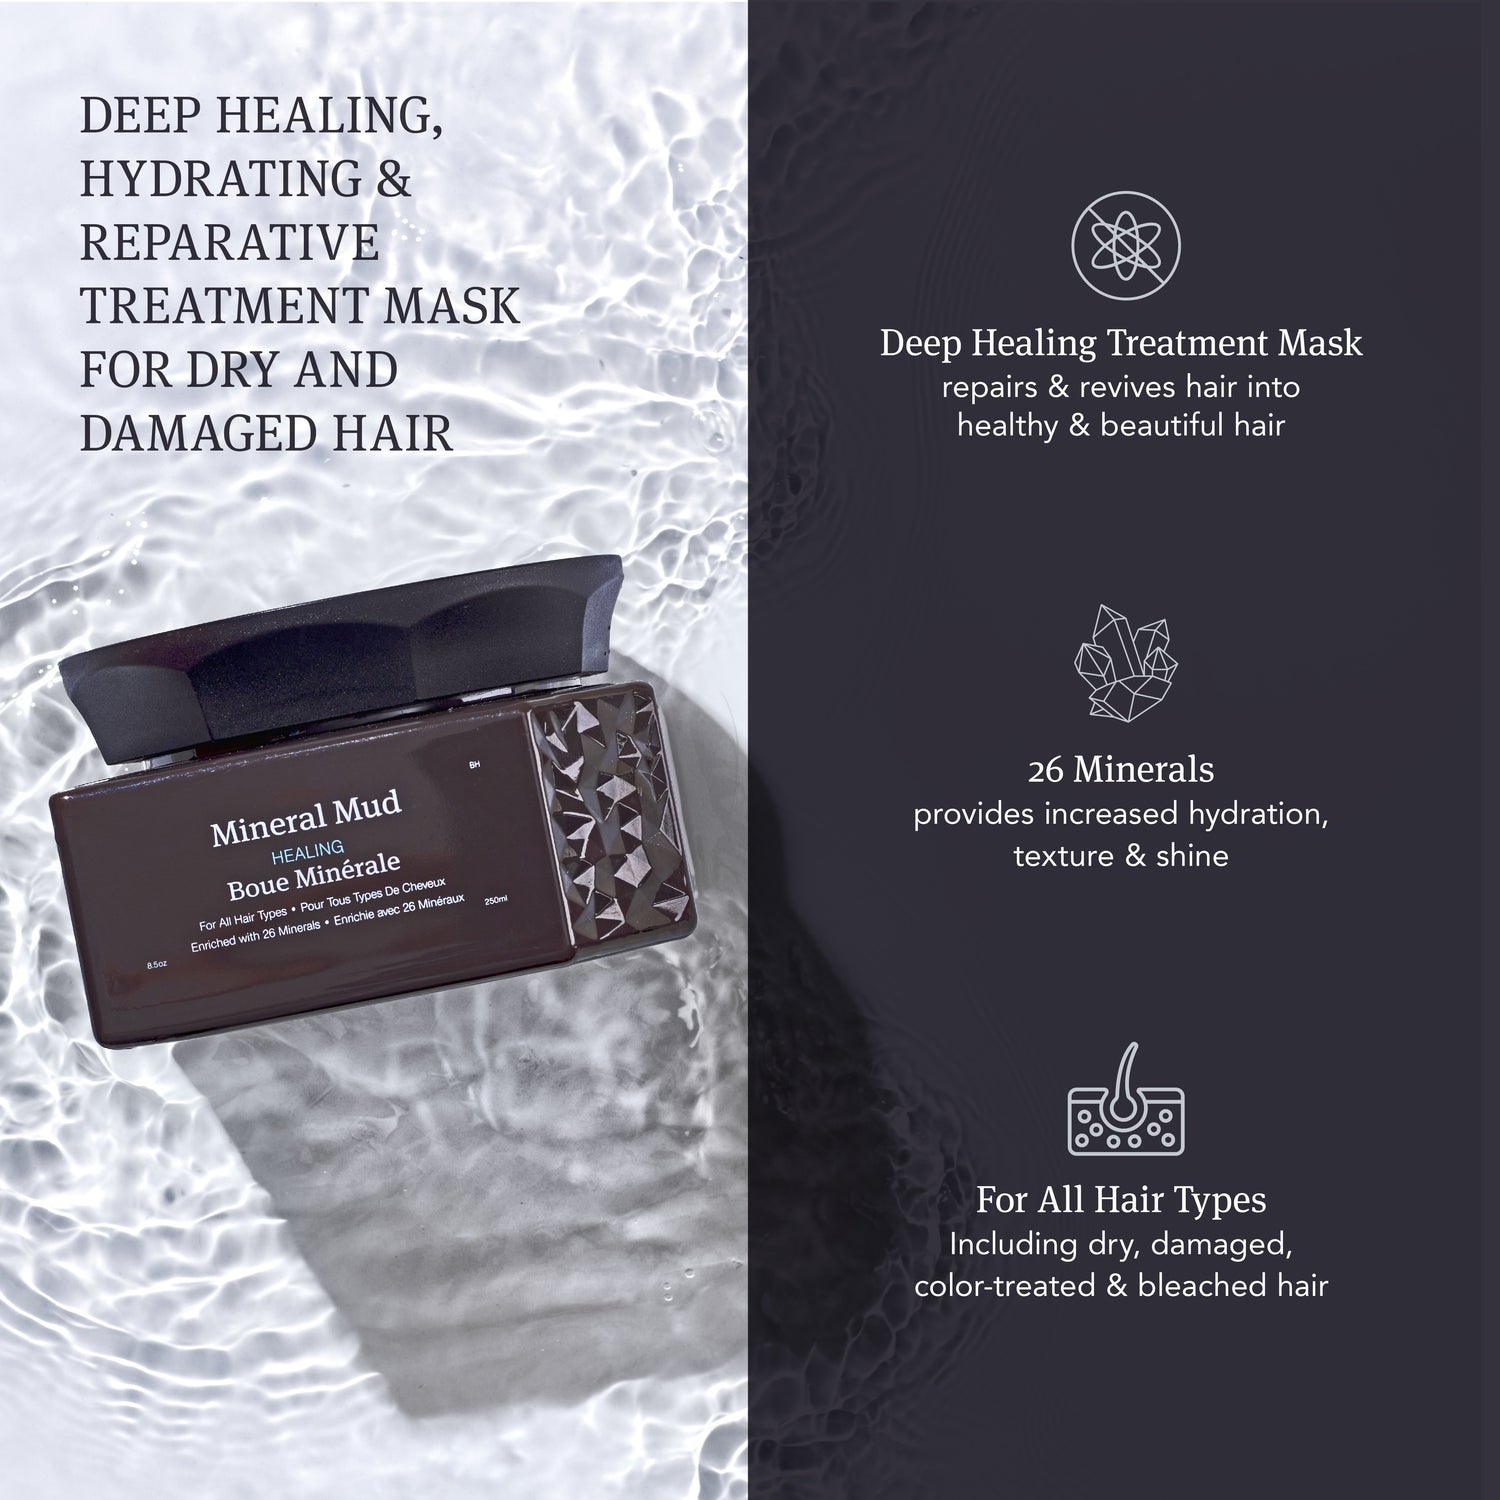 Deep Healing, Hydrating & Reparative treatment mask for dry and damged hair